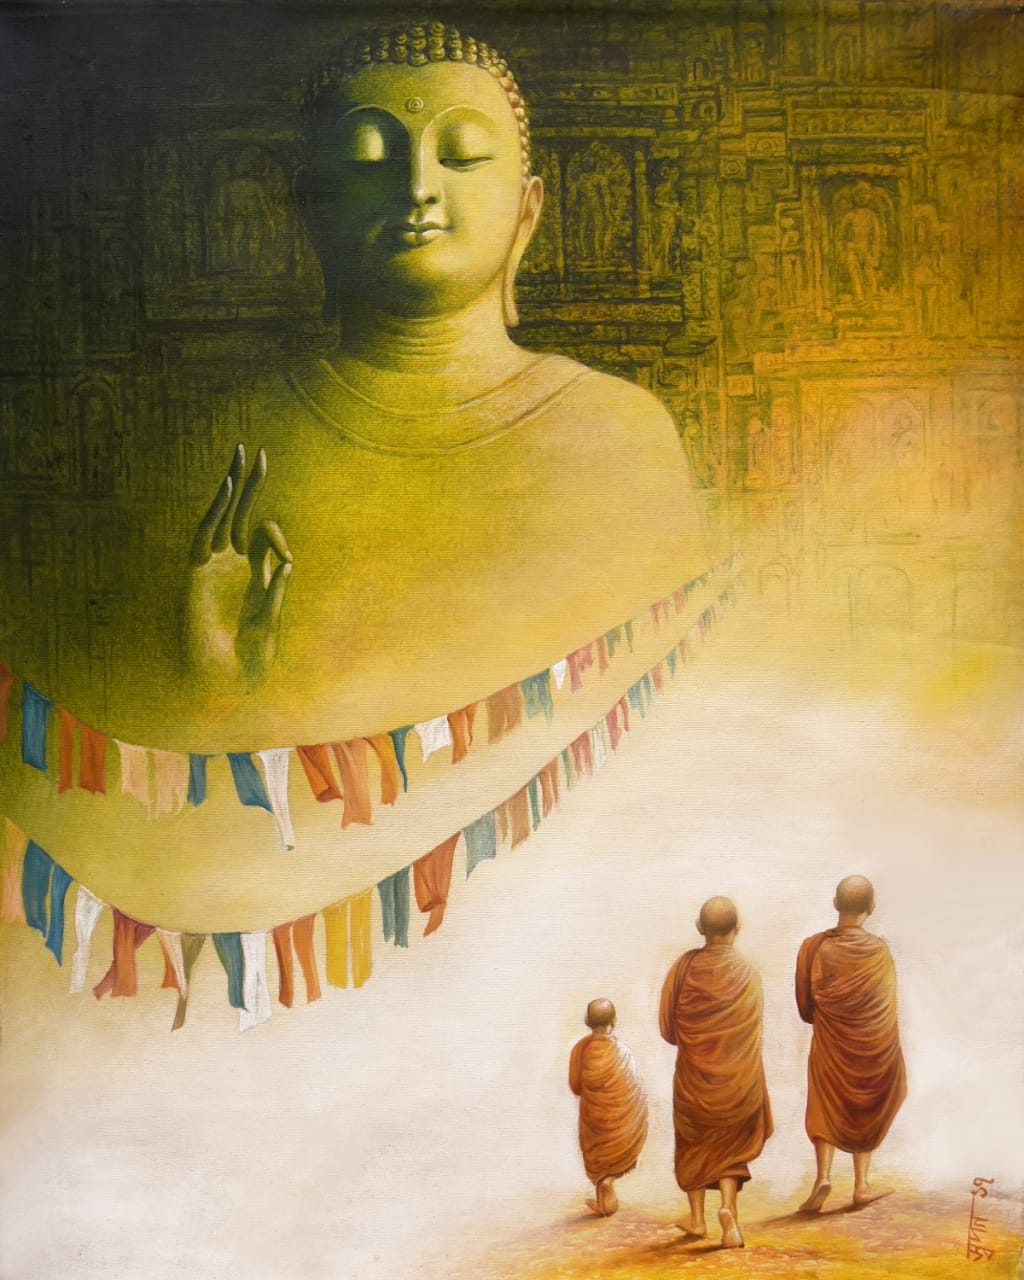 Figurative Painting with Acrylic on Canvas "Buddha-6" art by Swapan Roy